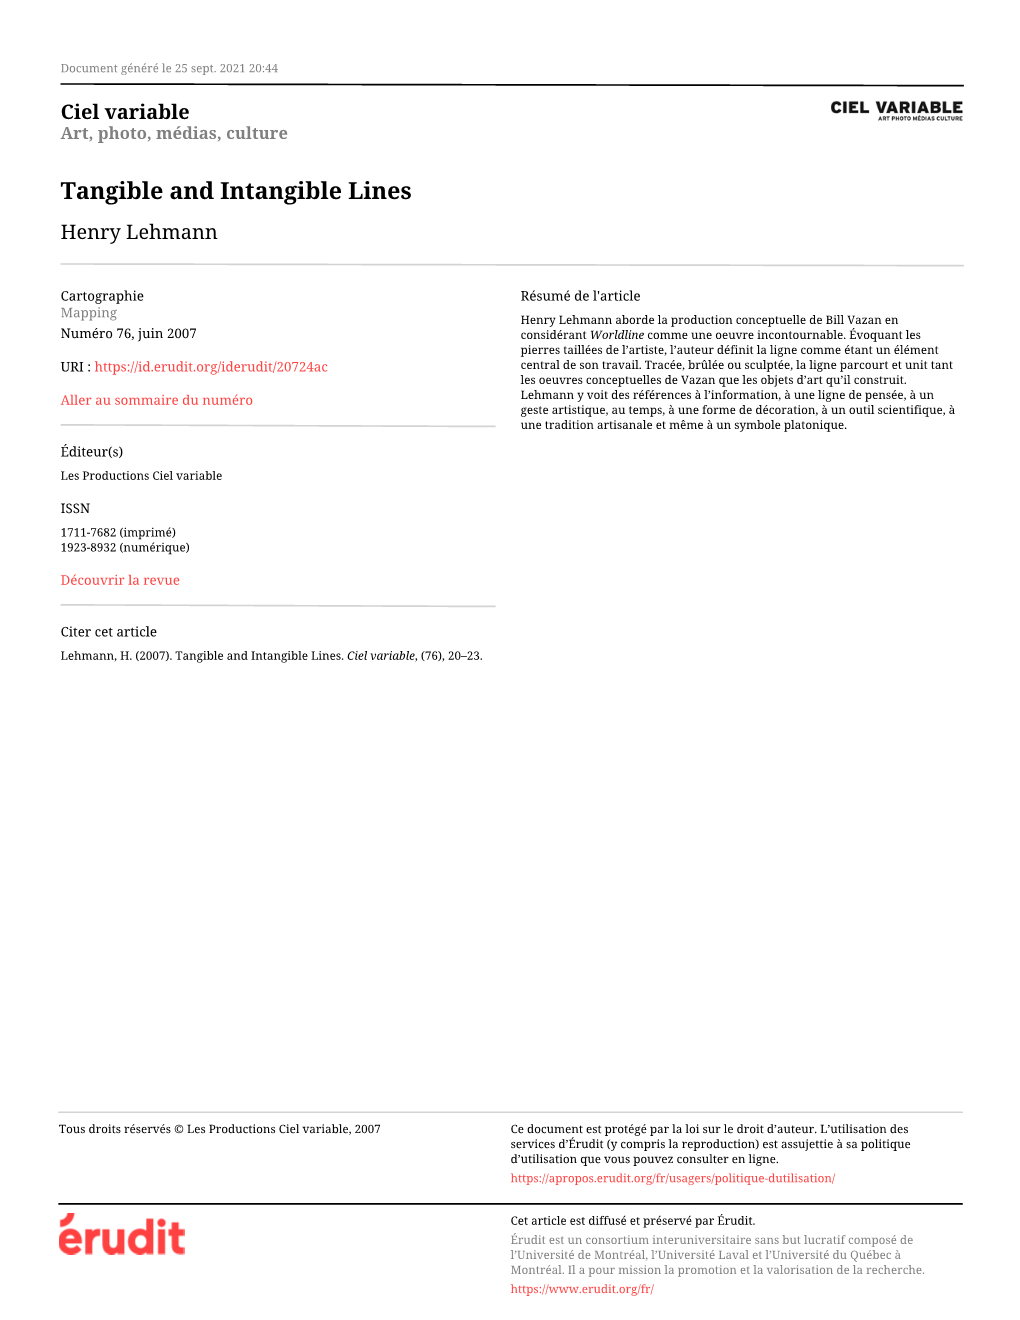 Tangible and Intangible Lines Henry Lehmann